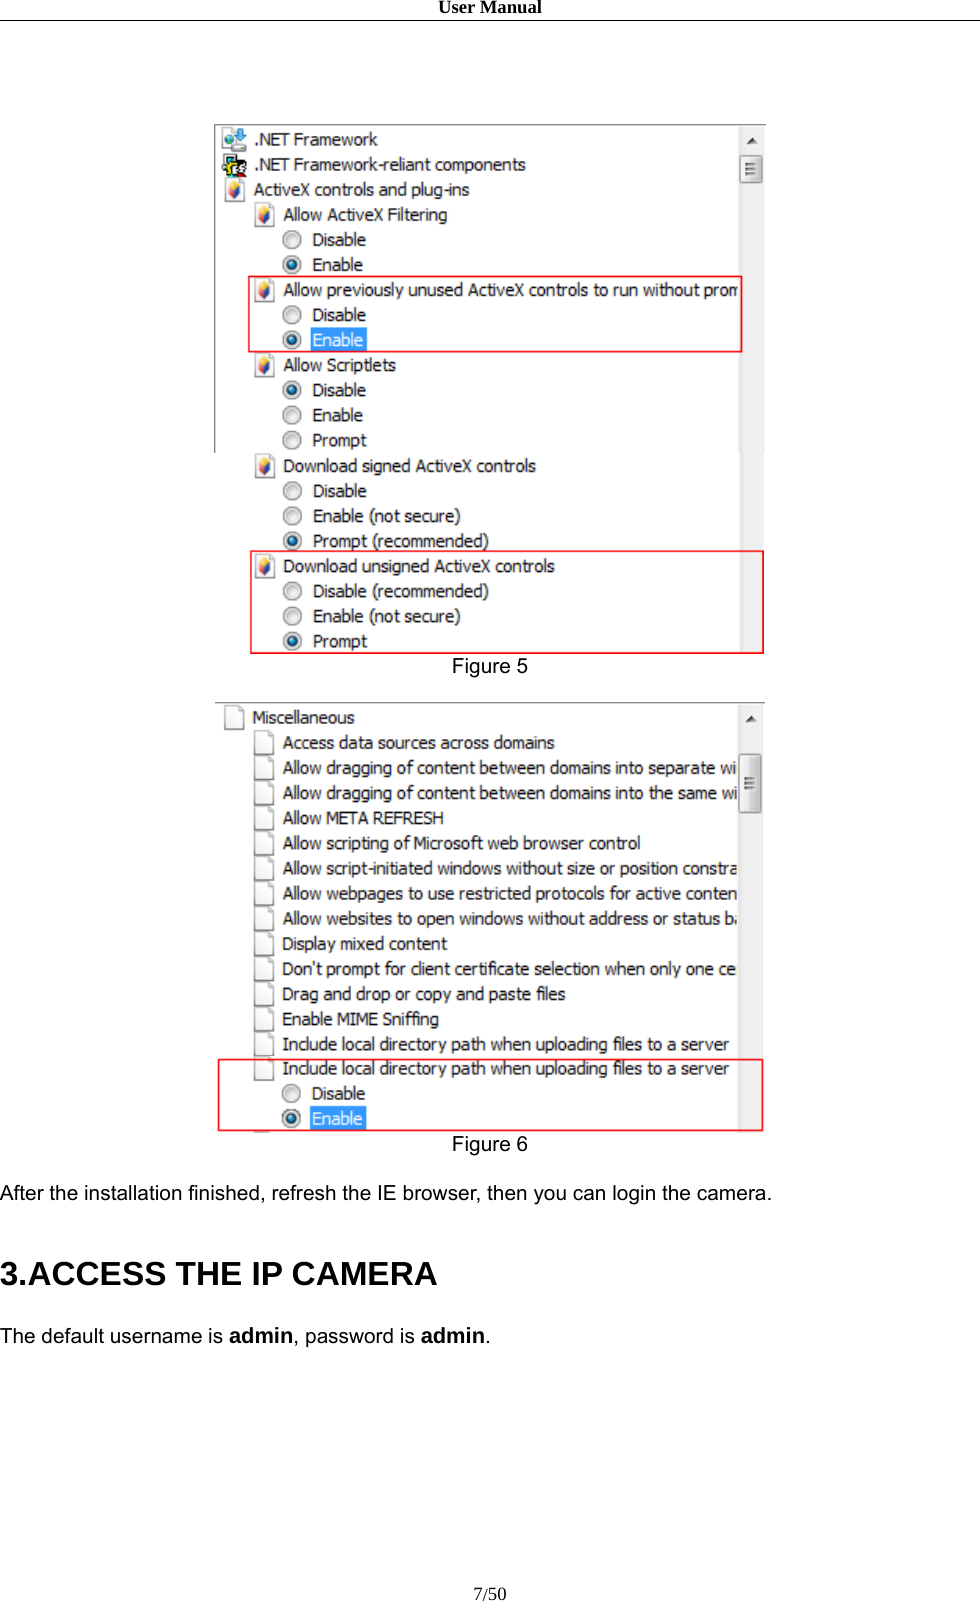 User Manual7/50Figure 5Figure 6After the installation finished, refresh the IE browser, then you can login the camera.3.ACCESS THE IP CAMERAThe default username is admin,passwordisadmin.